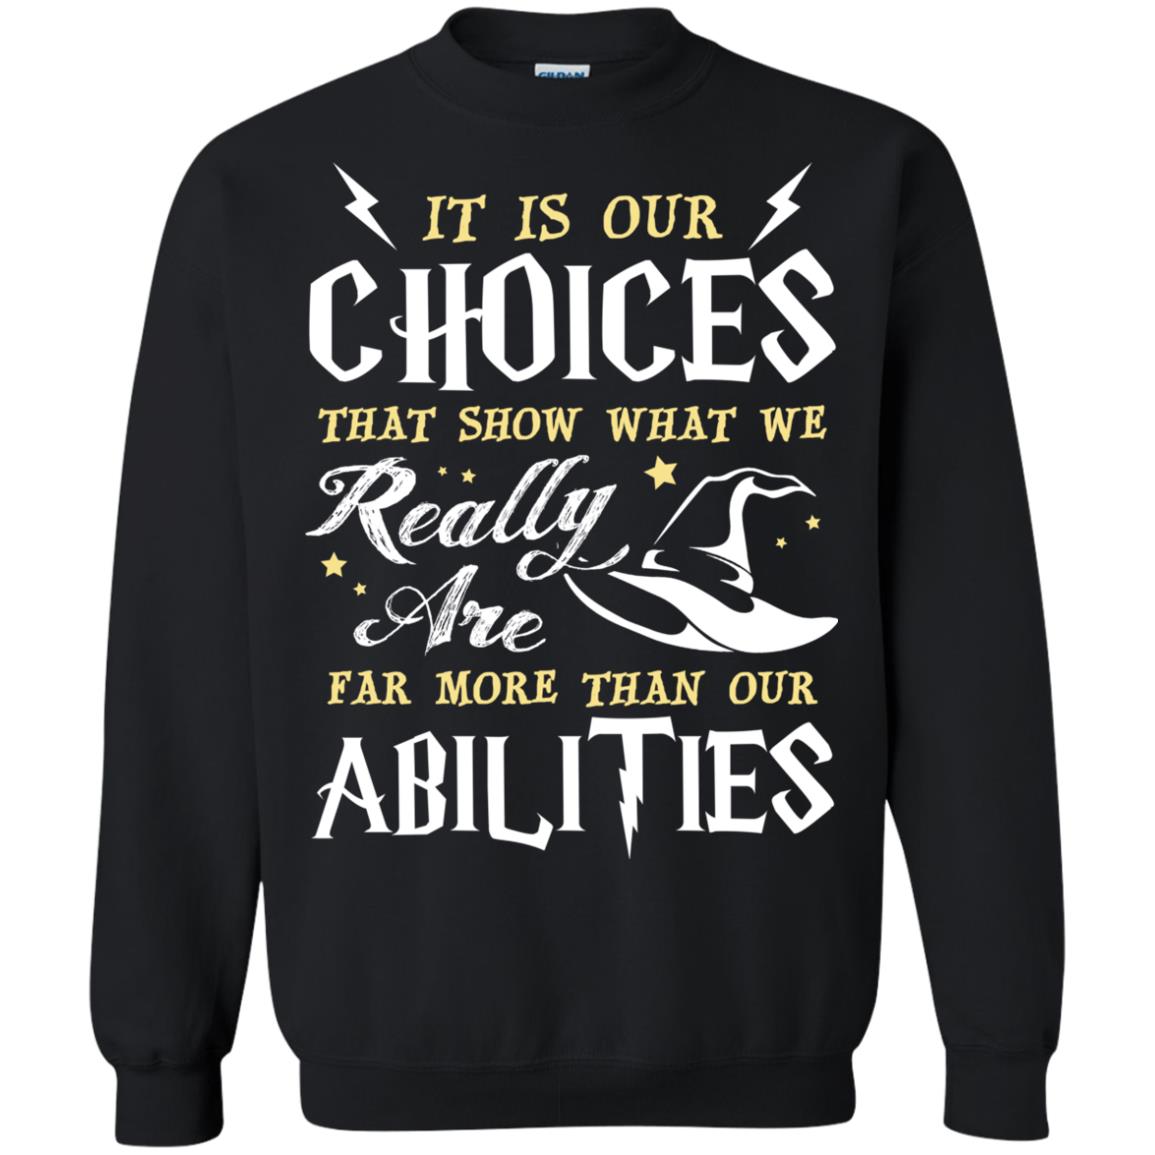 It Is Our Choices That Show What We Really Are Far More Than Our Abilities Harry Potter Fan T-shirtG180 Gildan Crewneck Pullover Sweatshirt 8 oz.